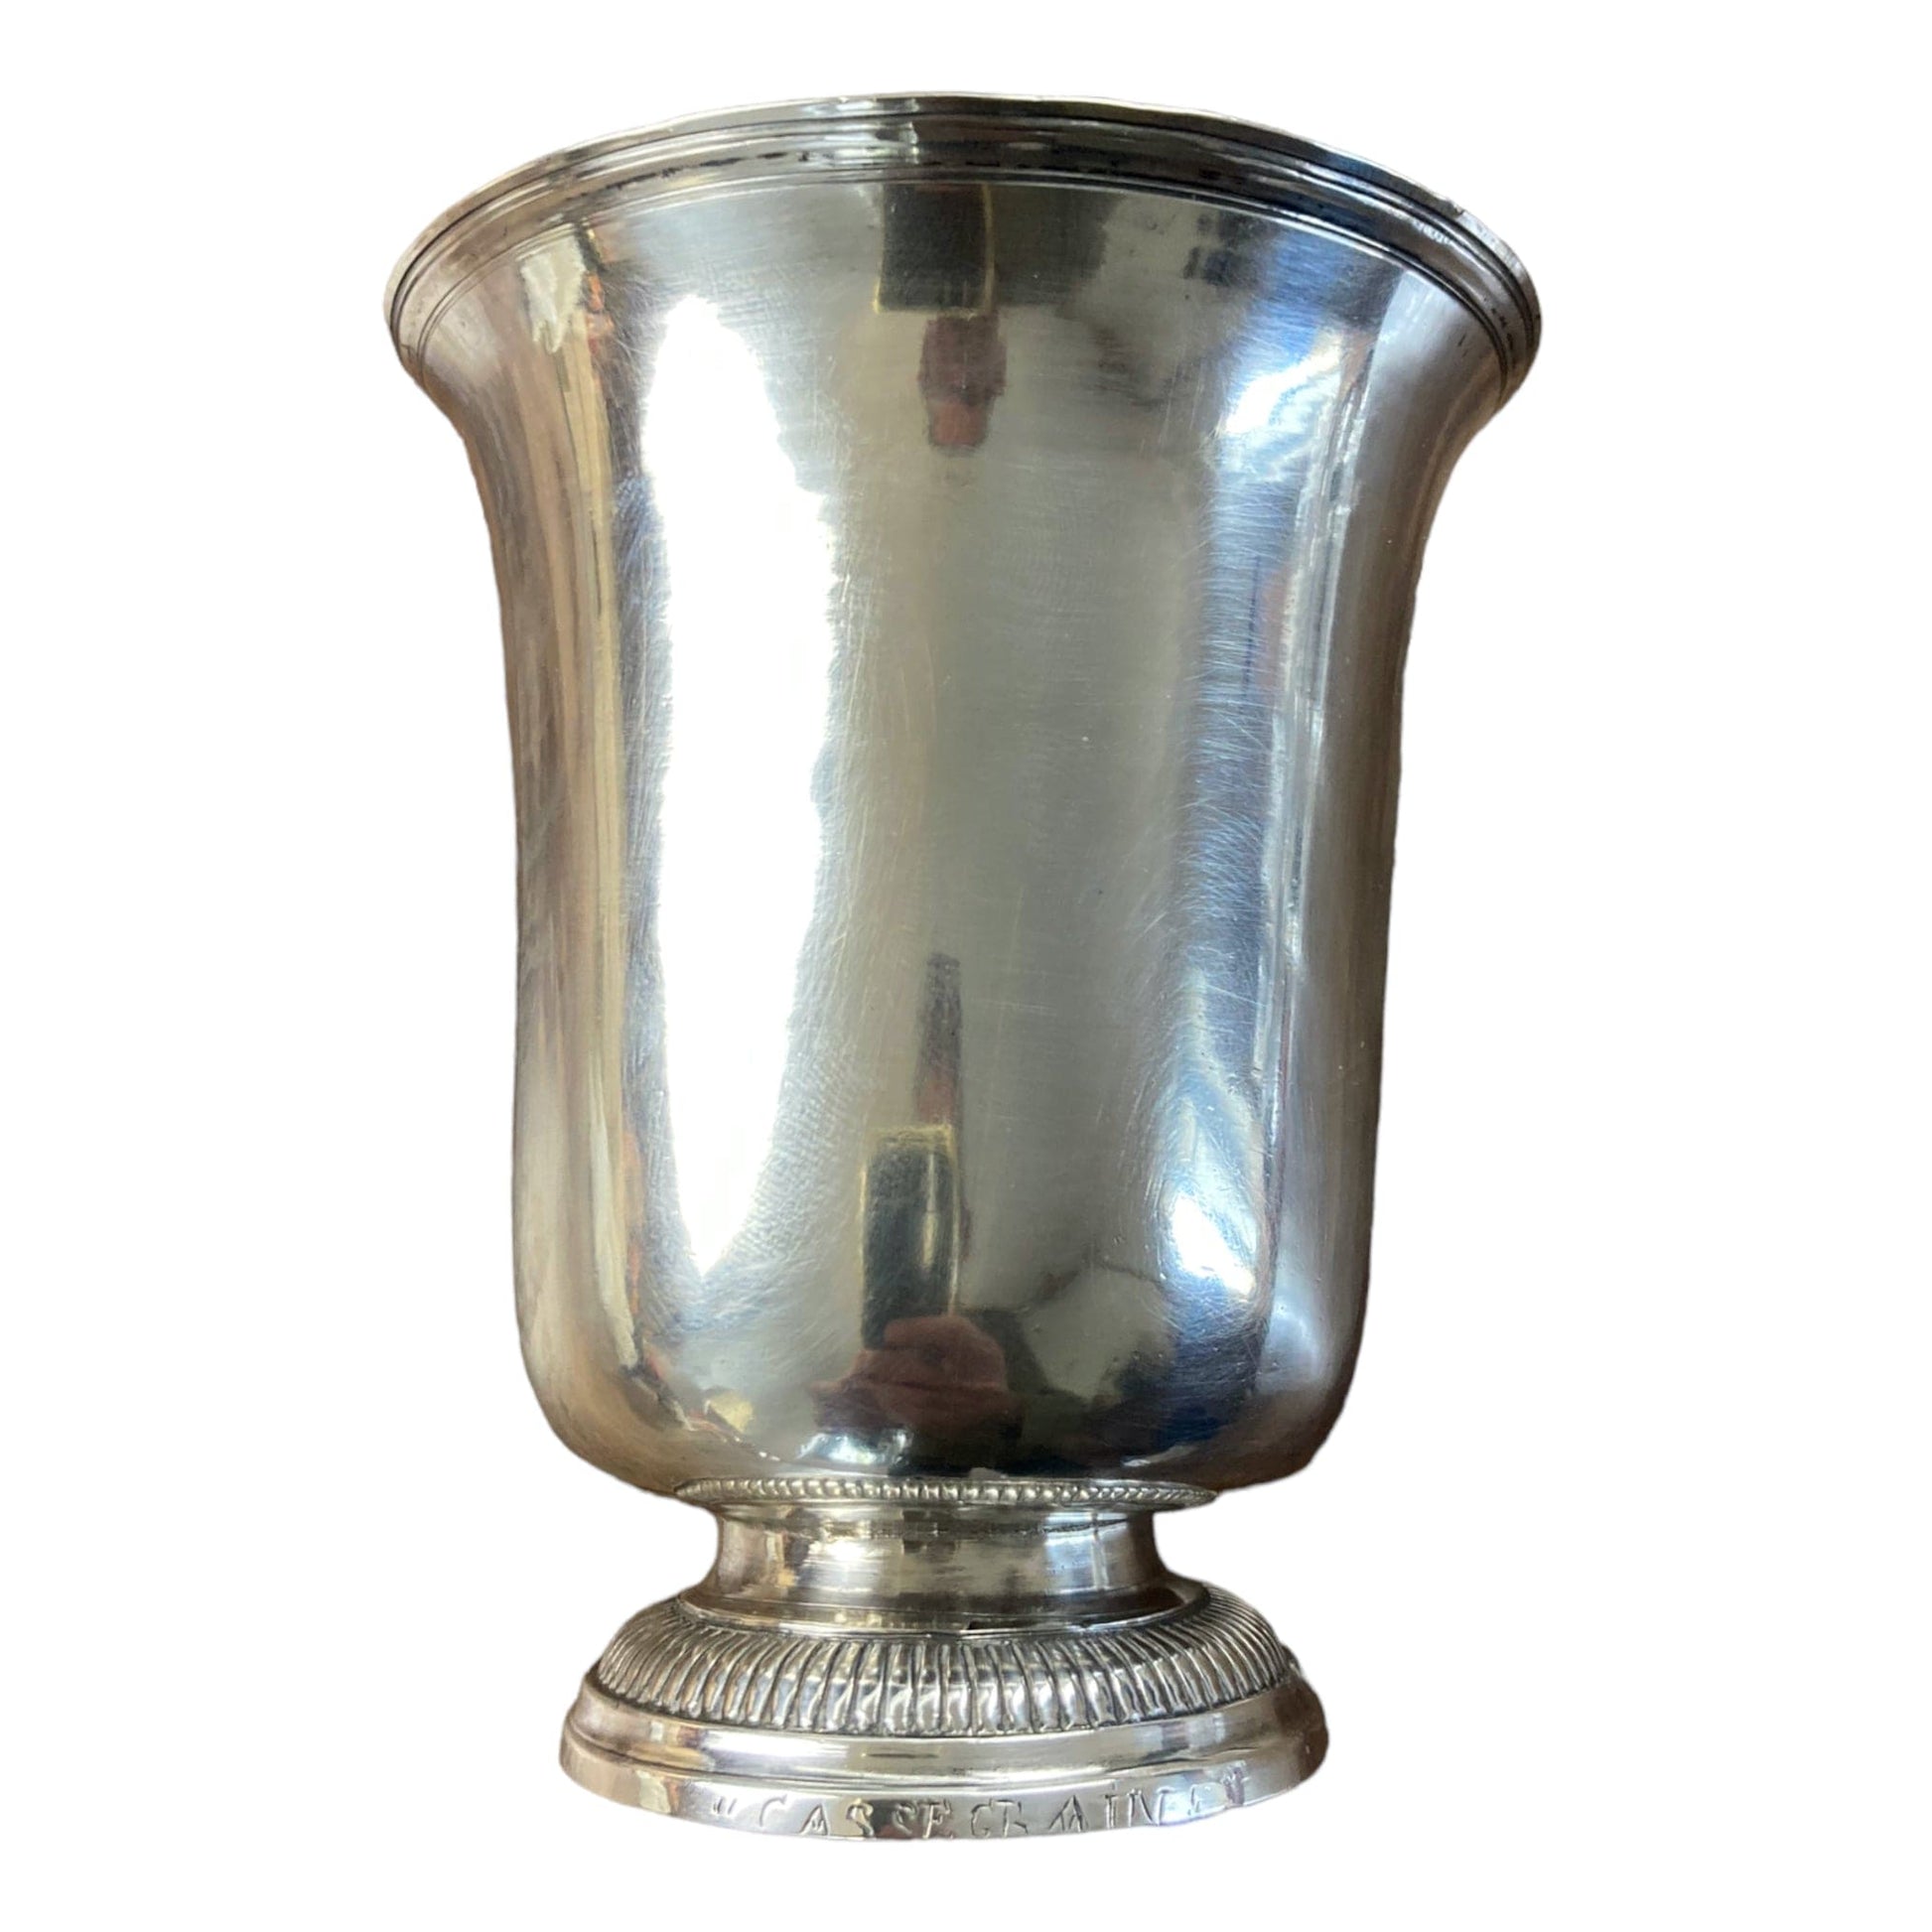 timbale argent massif XVIIIe siècle Orléans